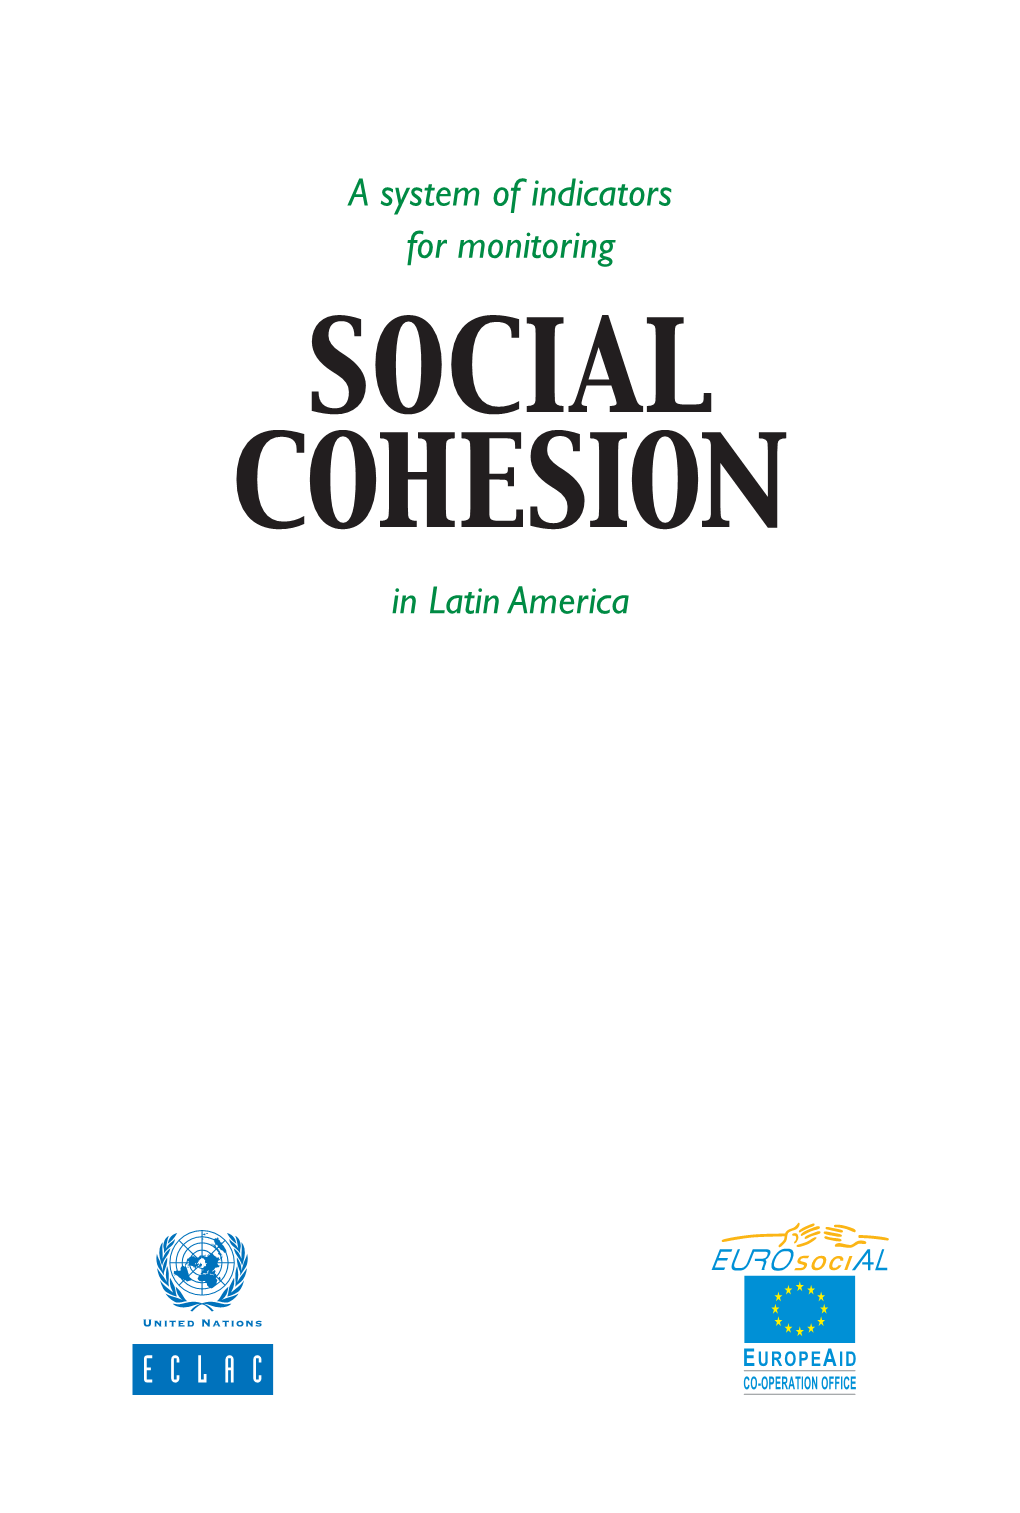 A System of Indicators for Monitoring Social Cohesion in Latin America